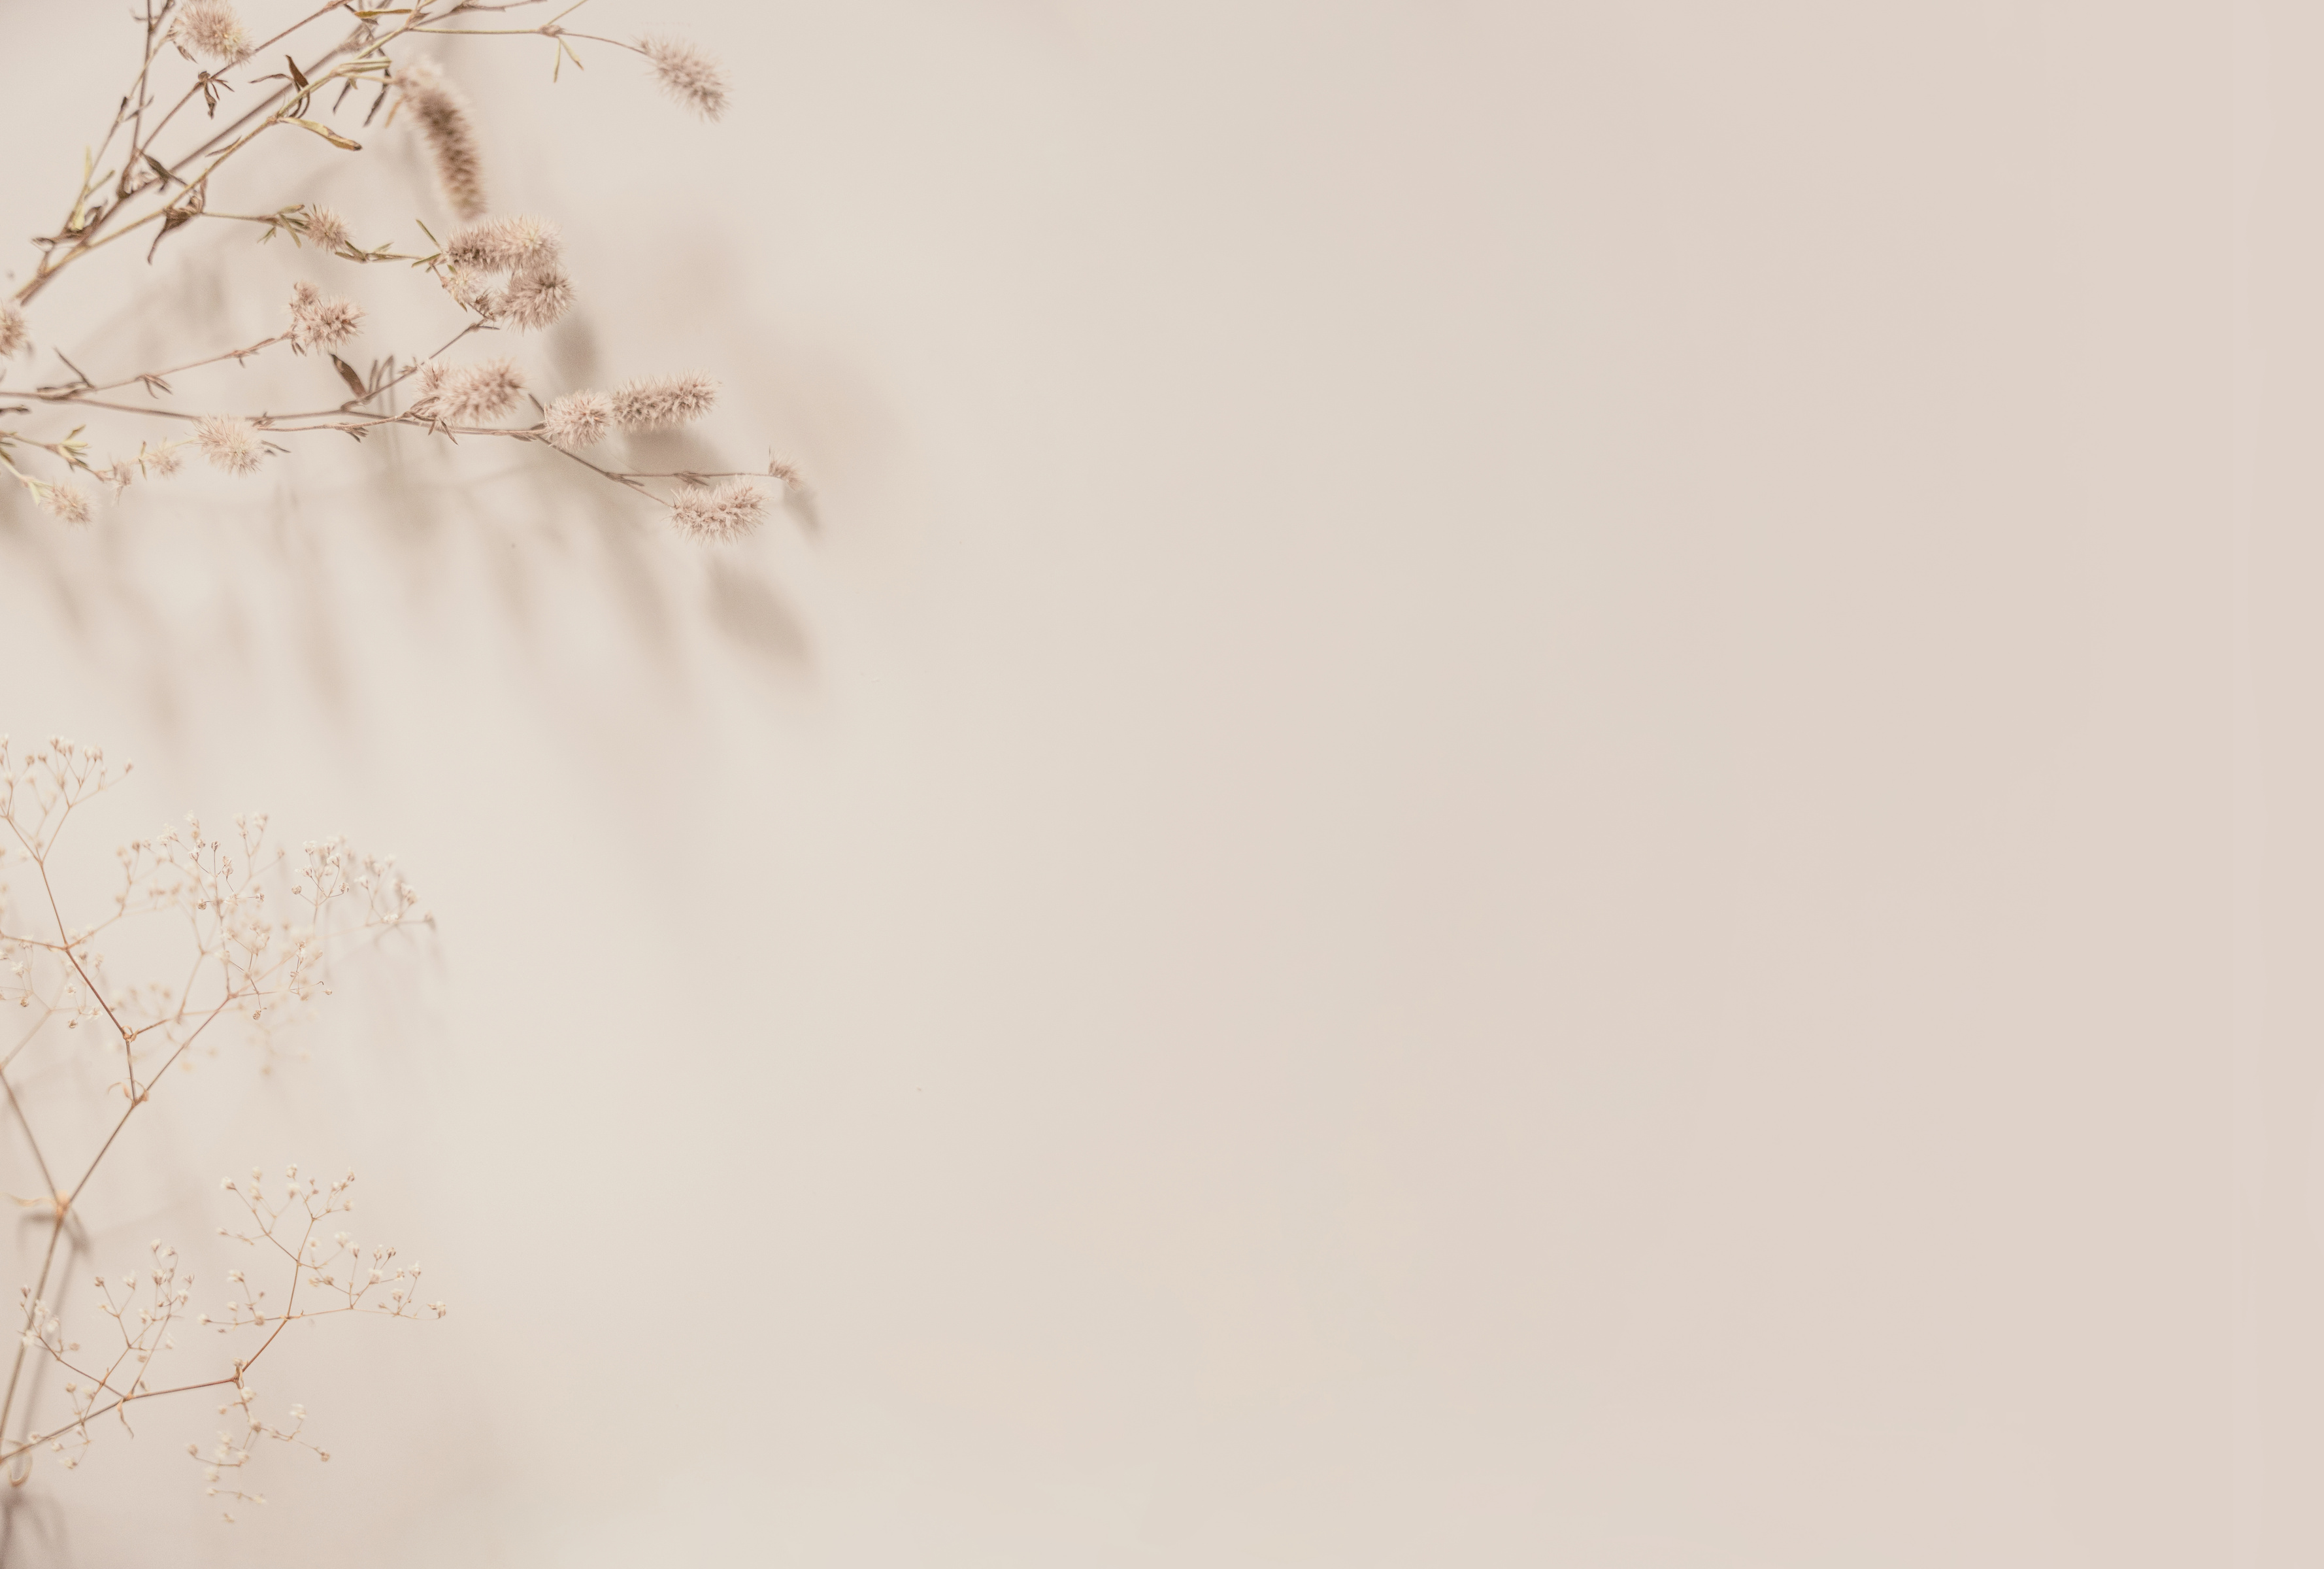 Pastel beige background with dried plants, minimalist and aesthetic